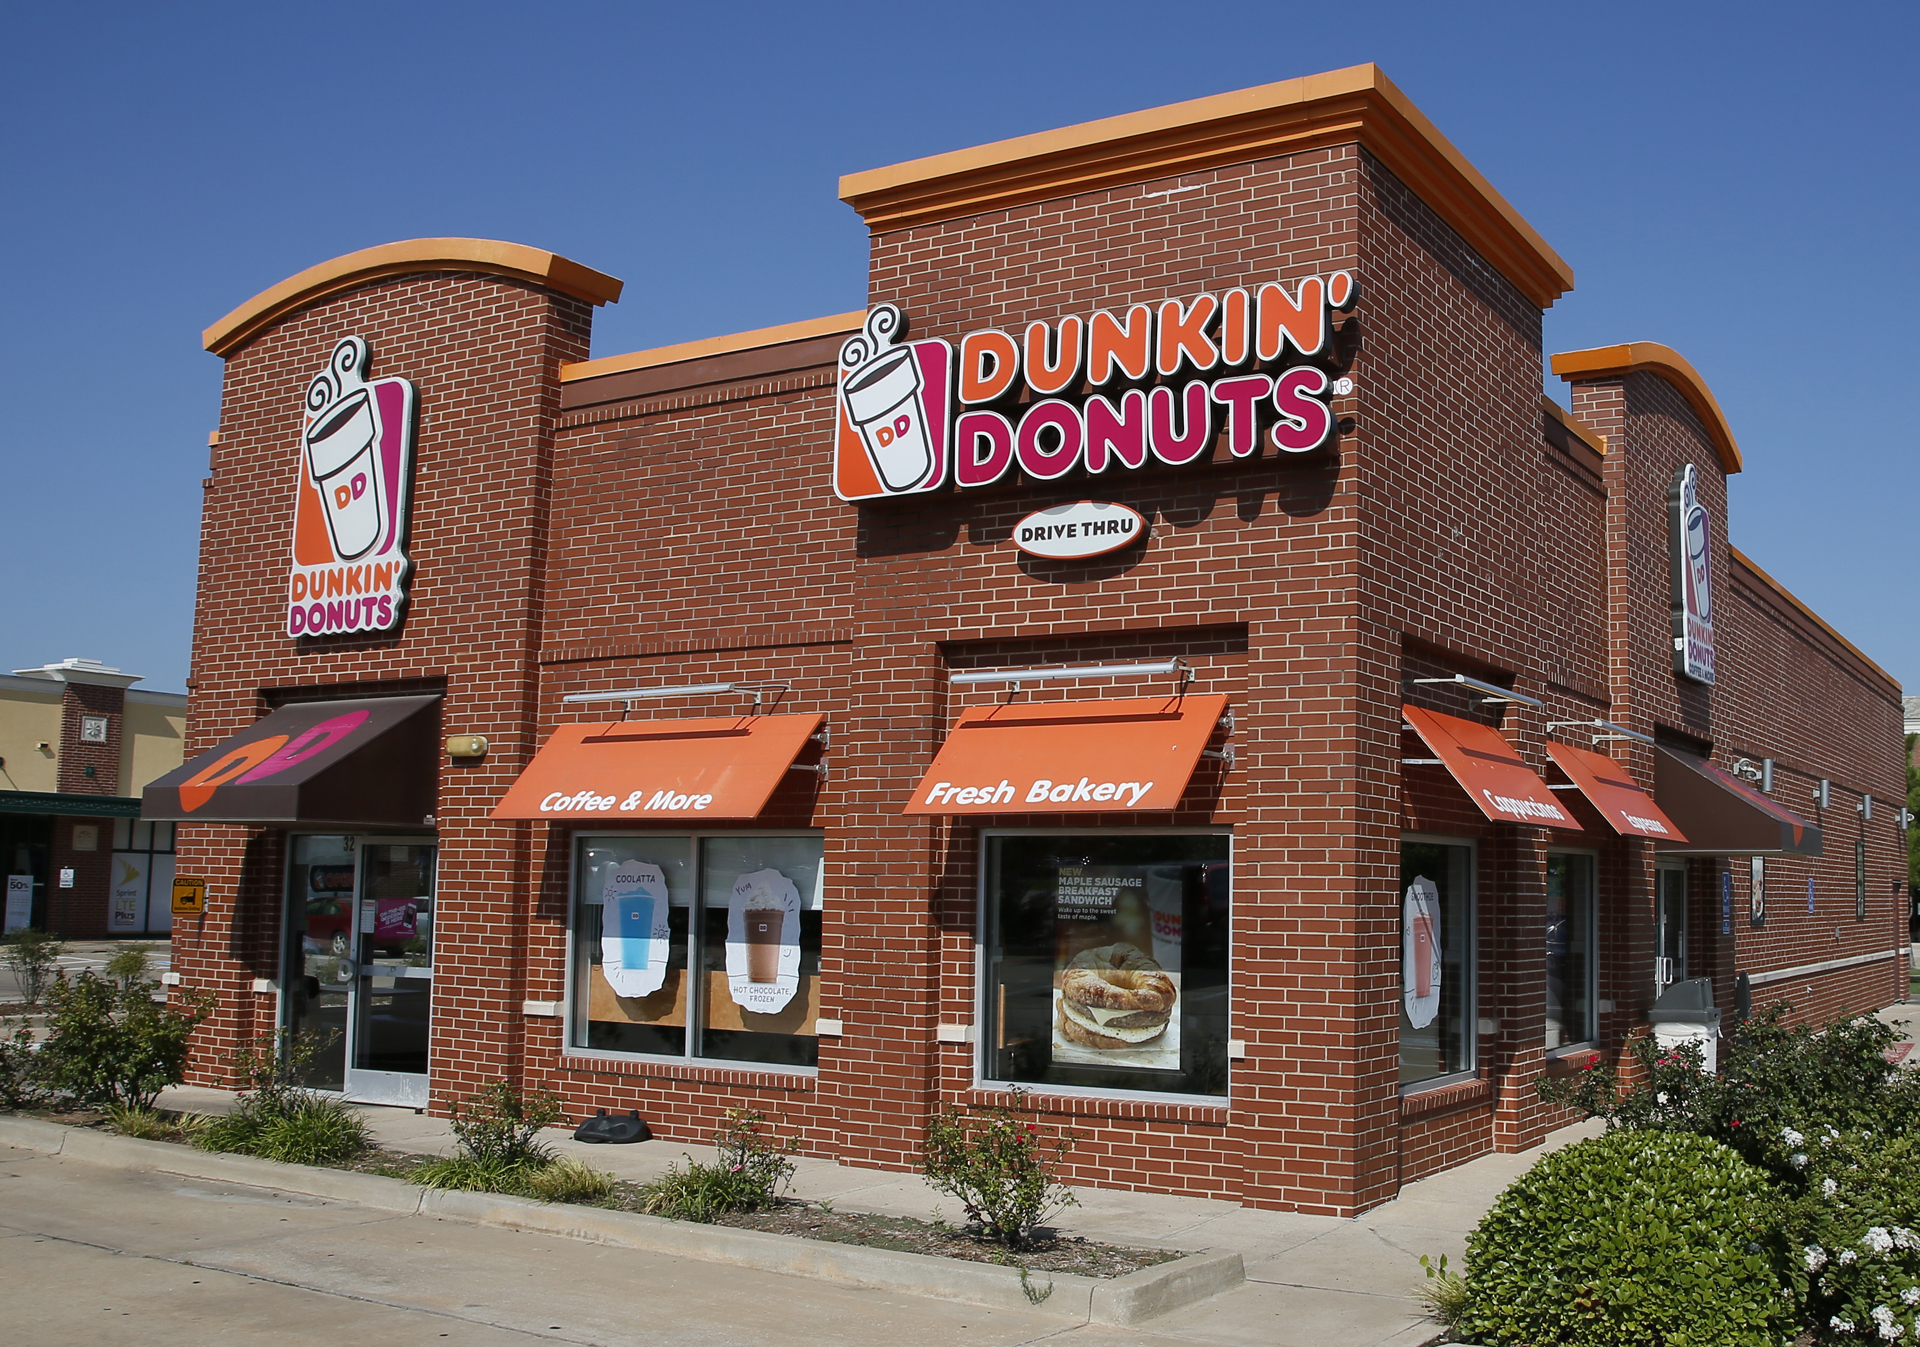 Dunkin's brands will go private in the 76 8.76b deal with the RB owner

